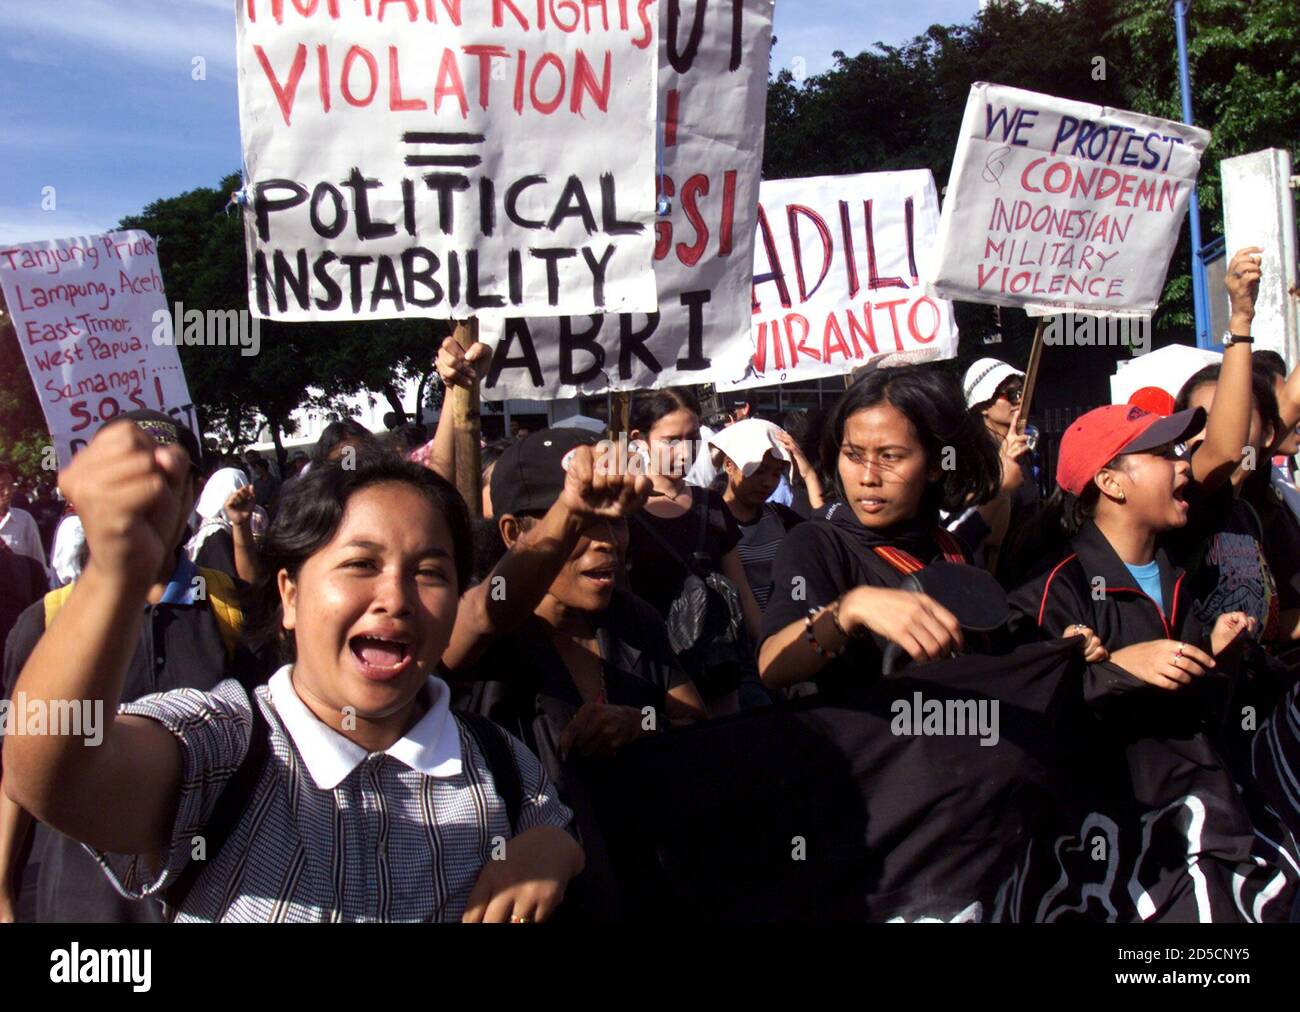 Indonesian protesters carry banners as they demonstrate in central Jakarta November 20. Indonesia was braced for fresh anti-government protests after ceremonies to mourn the students killed a week ago in violent clashes with the military and officials said former [President Suharto] had left the city.  ??» Stock Photo